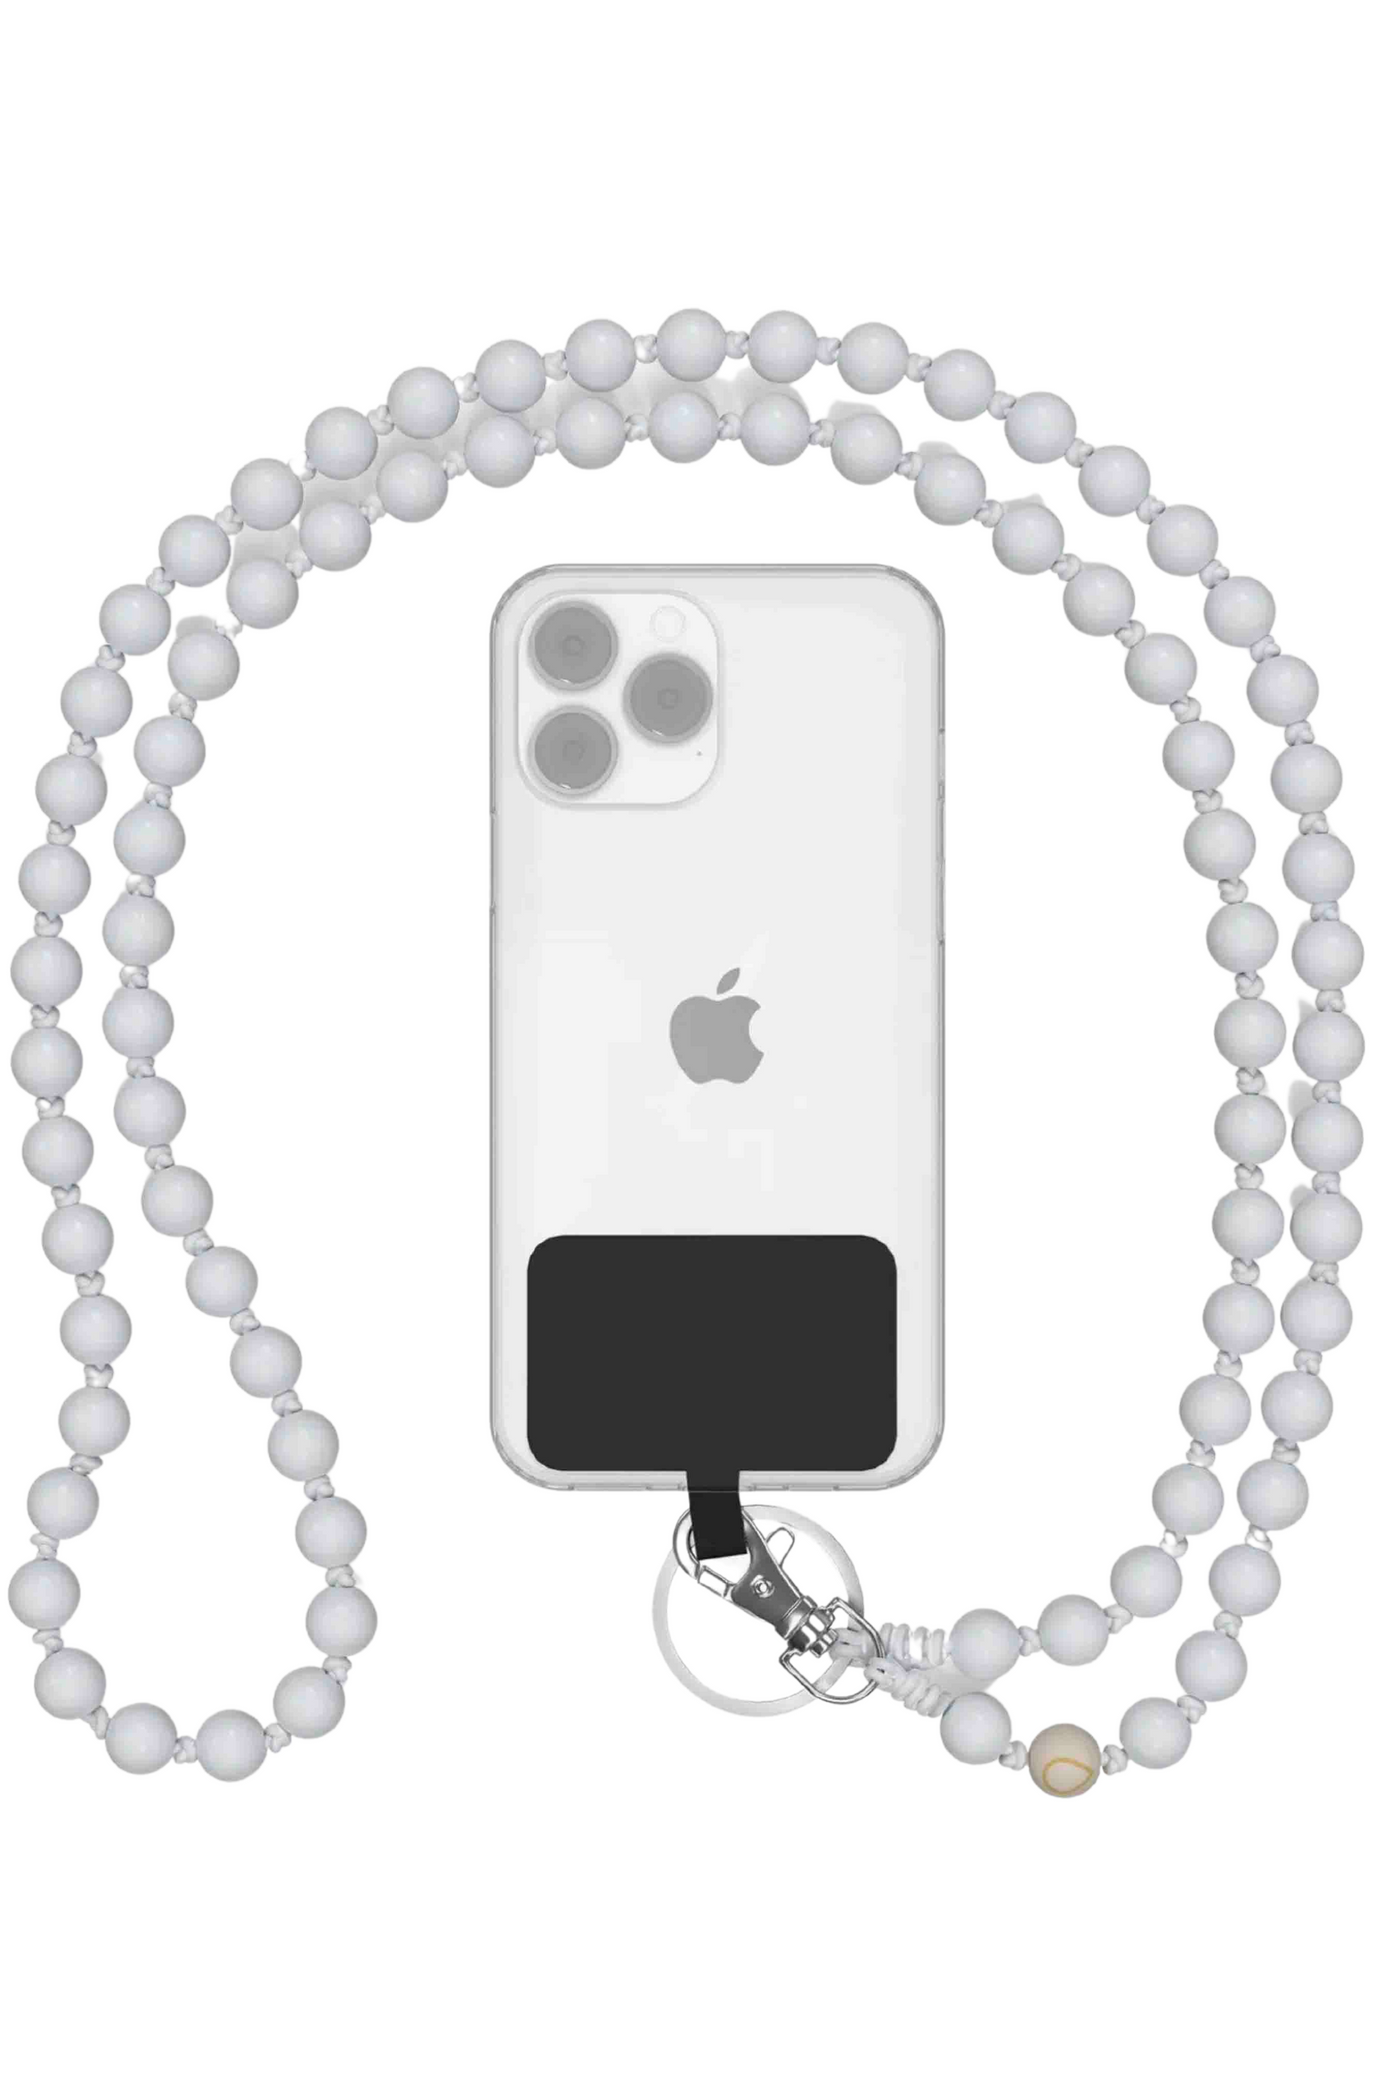 White Beach Beaded CellPhone Chain by Dropletsy